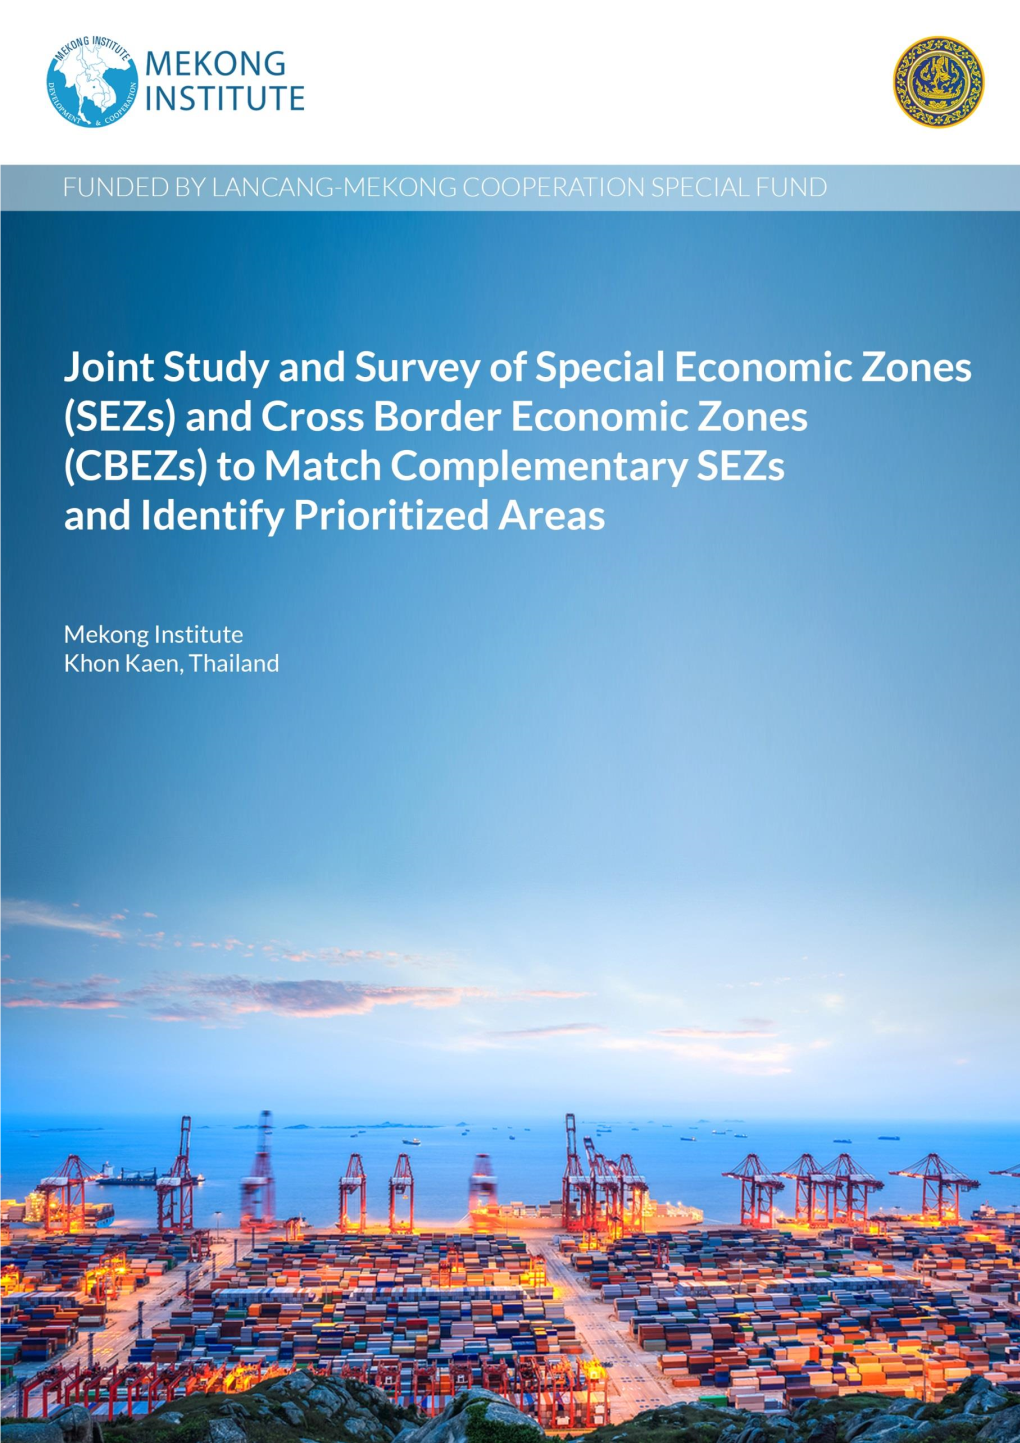 And Cross Border Economic Zones (Cbezs) to Match Complementary Sezs and Identify Prioritized Areas